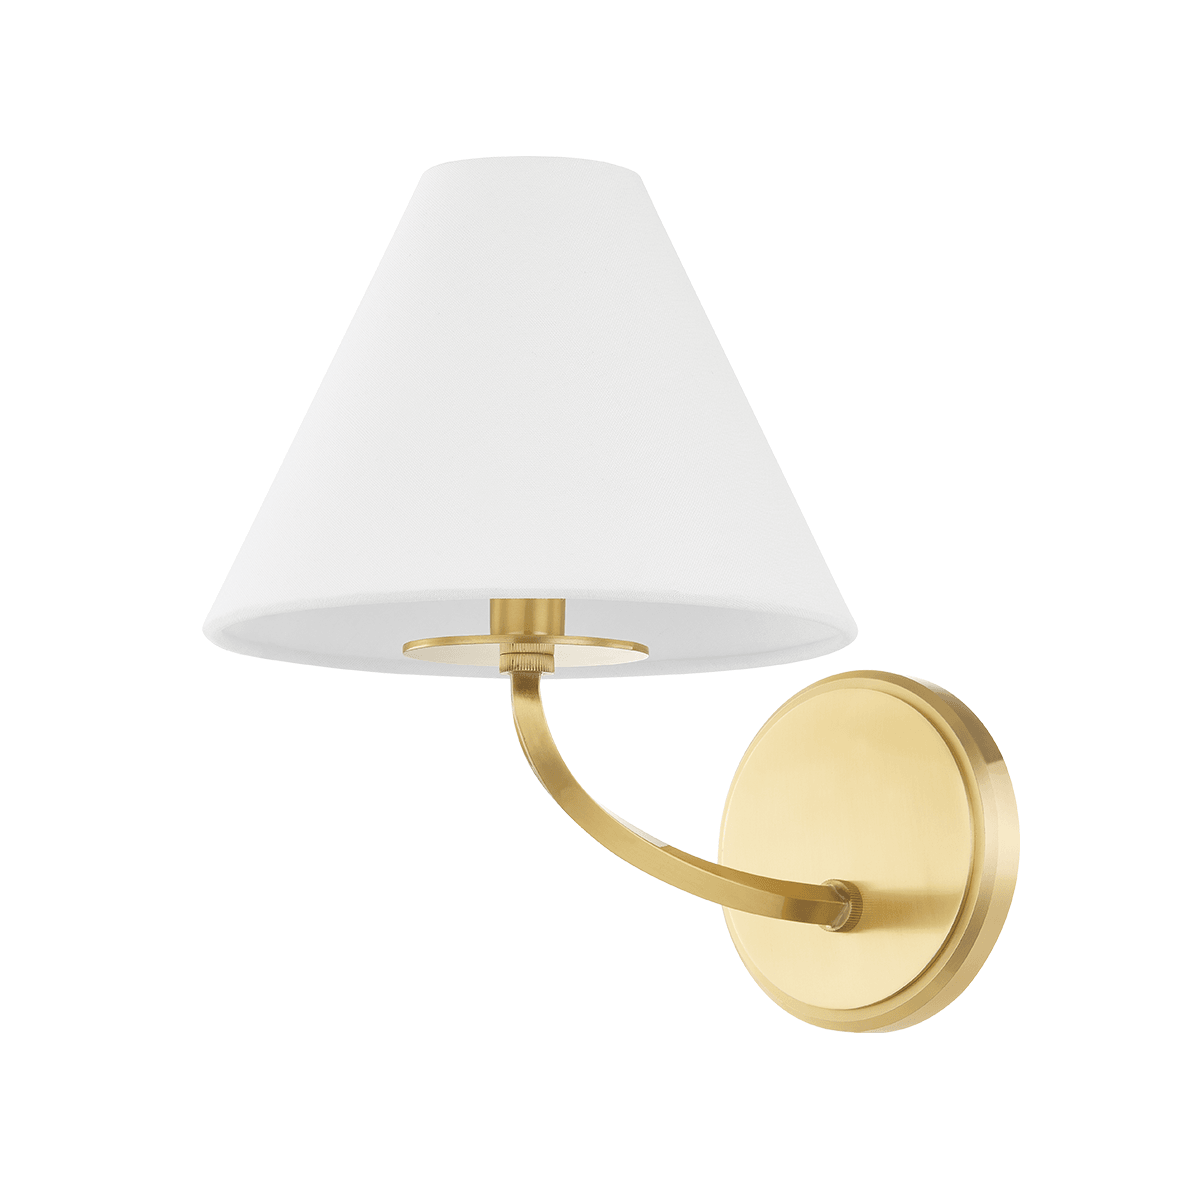 Hudson Valley Lighting - Stacey Wall Sconce - BKO900-AGB | Montreal Lighting & Hardware